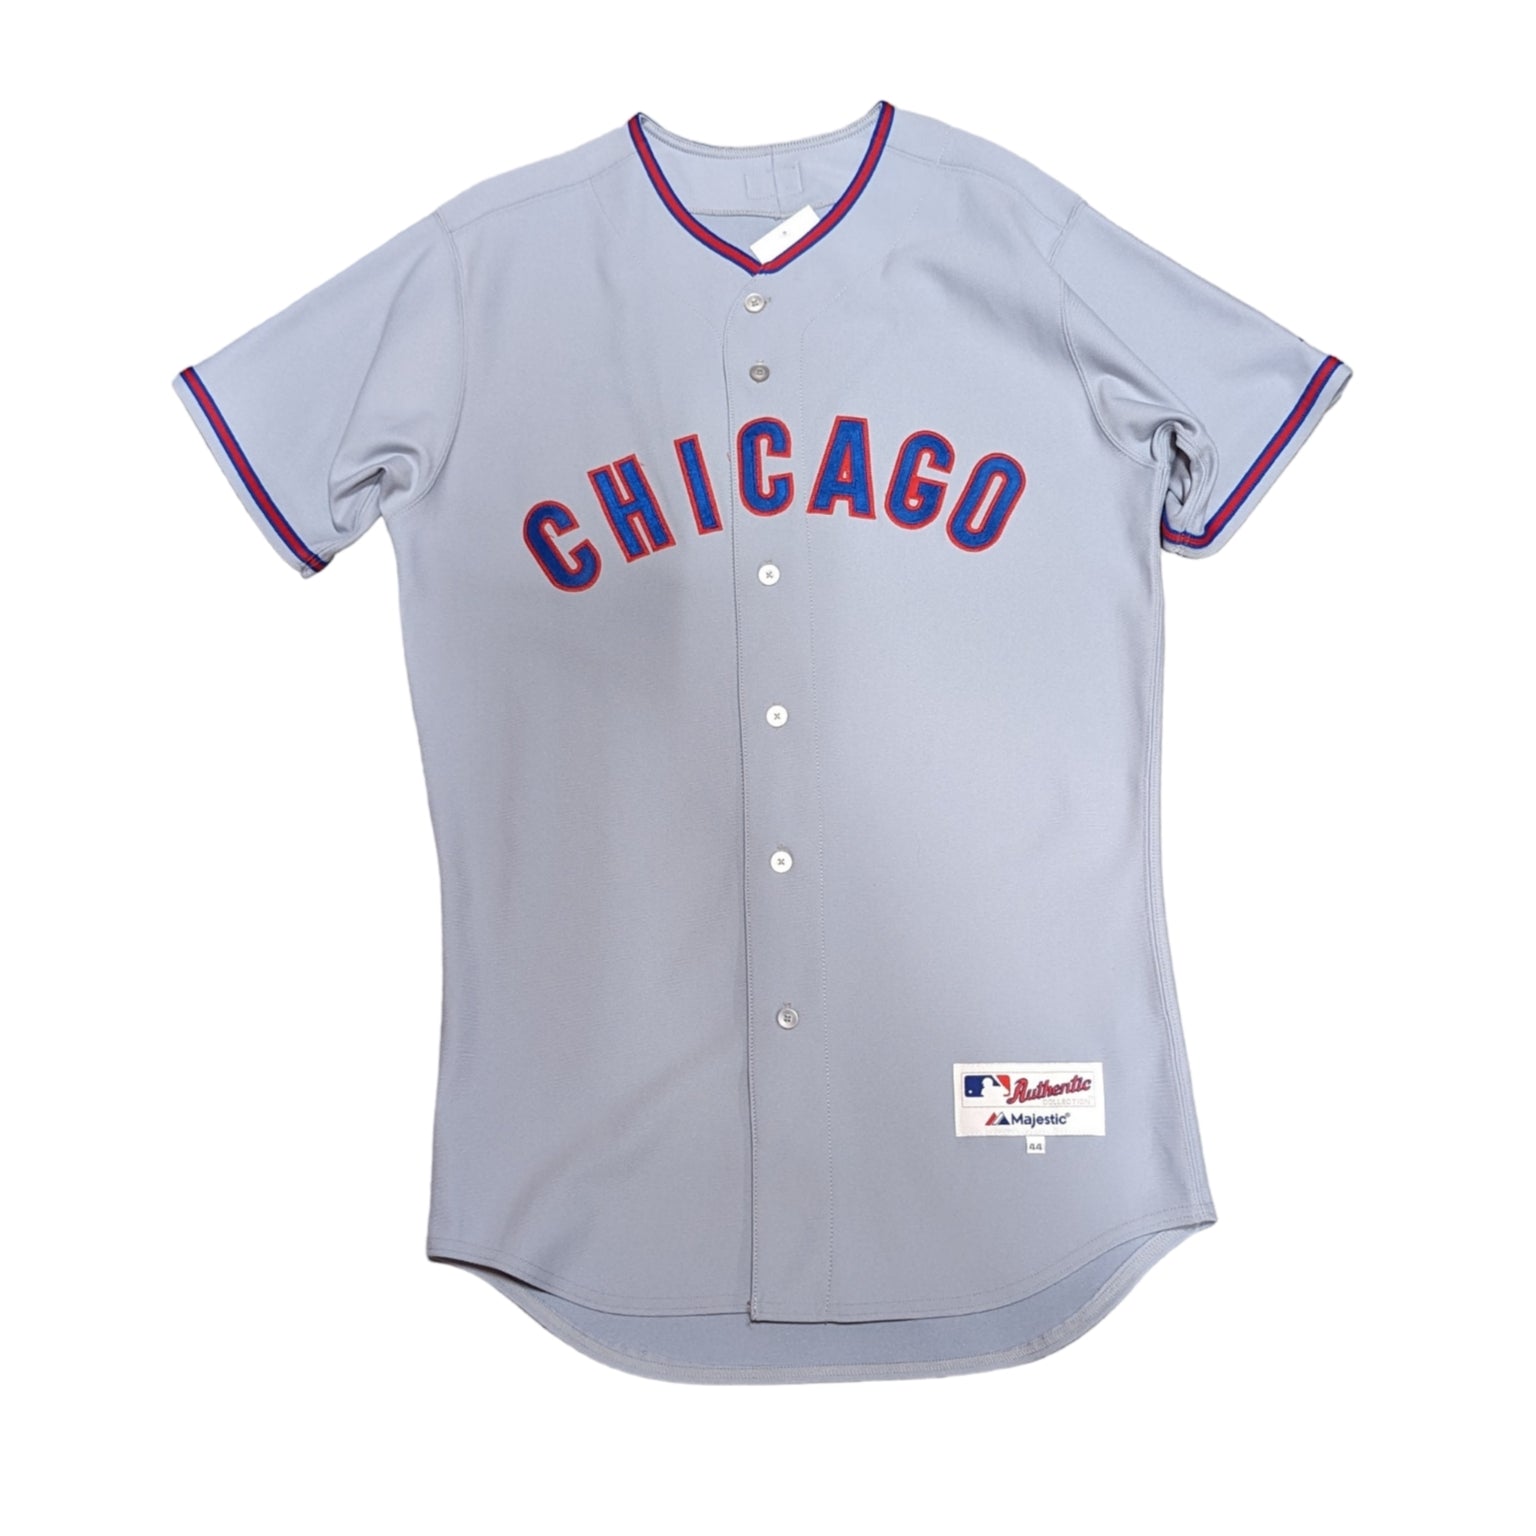 Chicago White Sox 1959 Home Replica Jersey by Nike